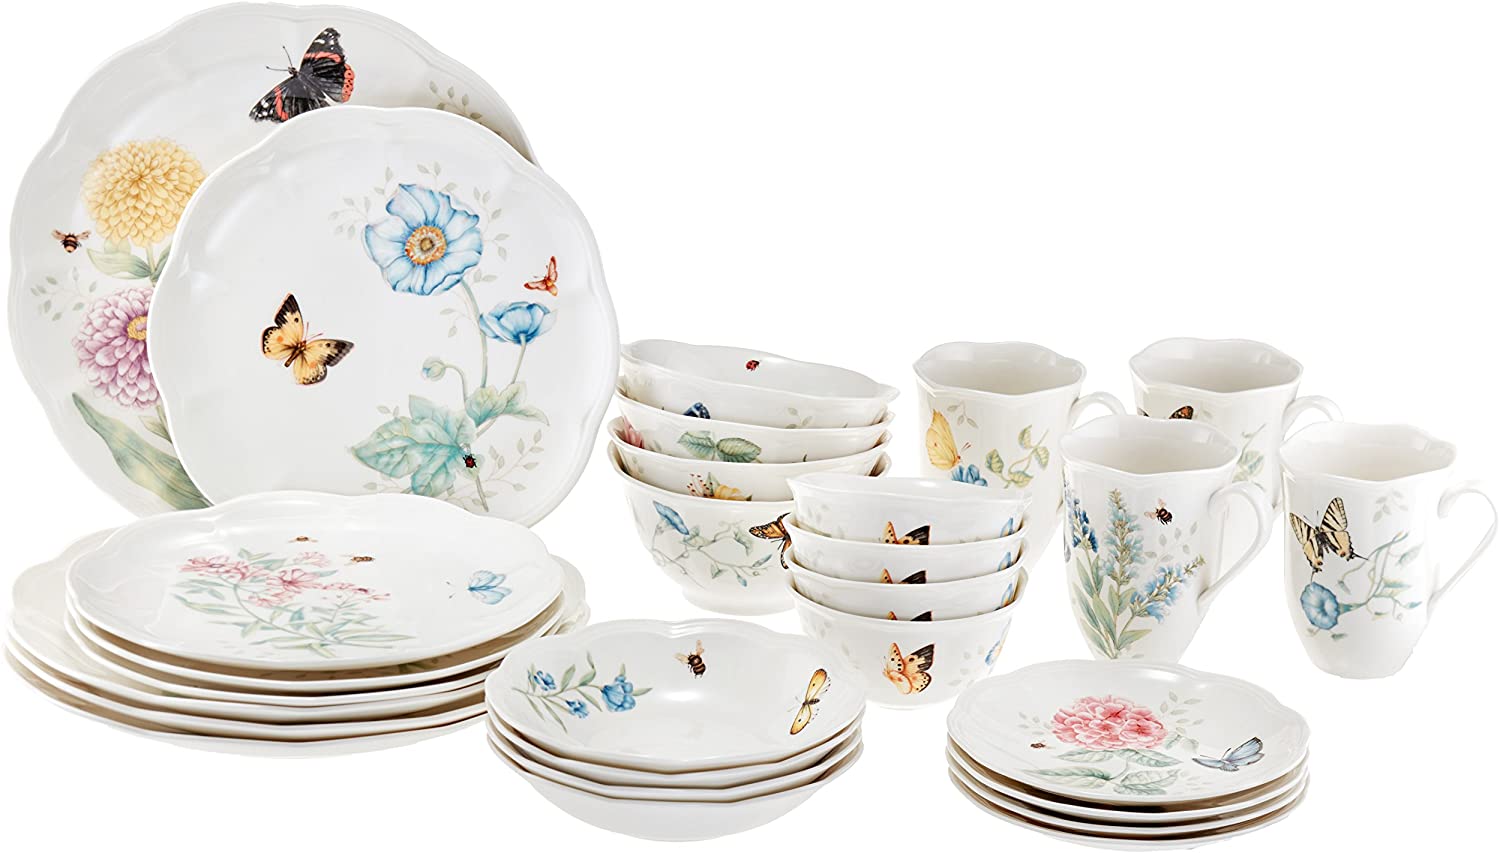 Lenox Butterfly Meadow Porcelain China Dinnerware - Set of 28 - Serves 4 People - Royal Gift